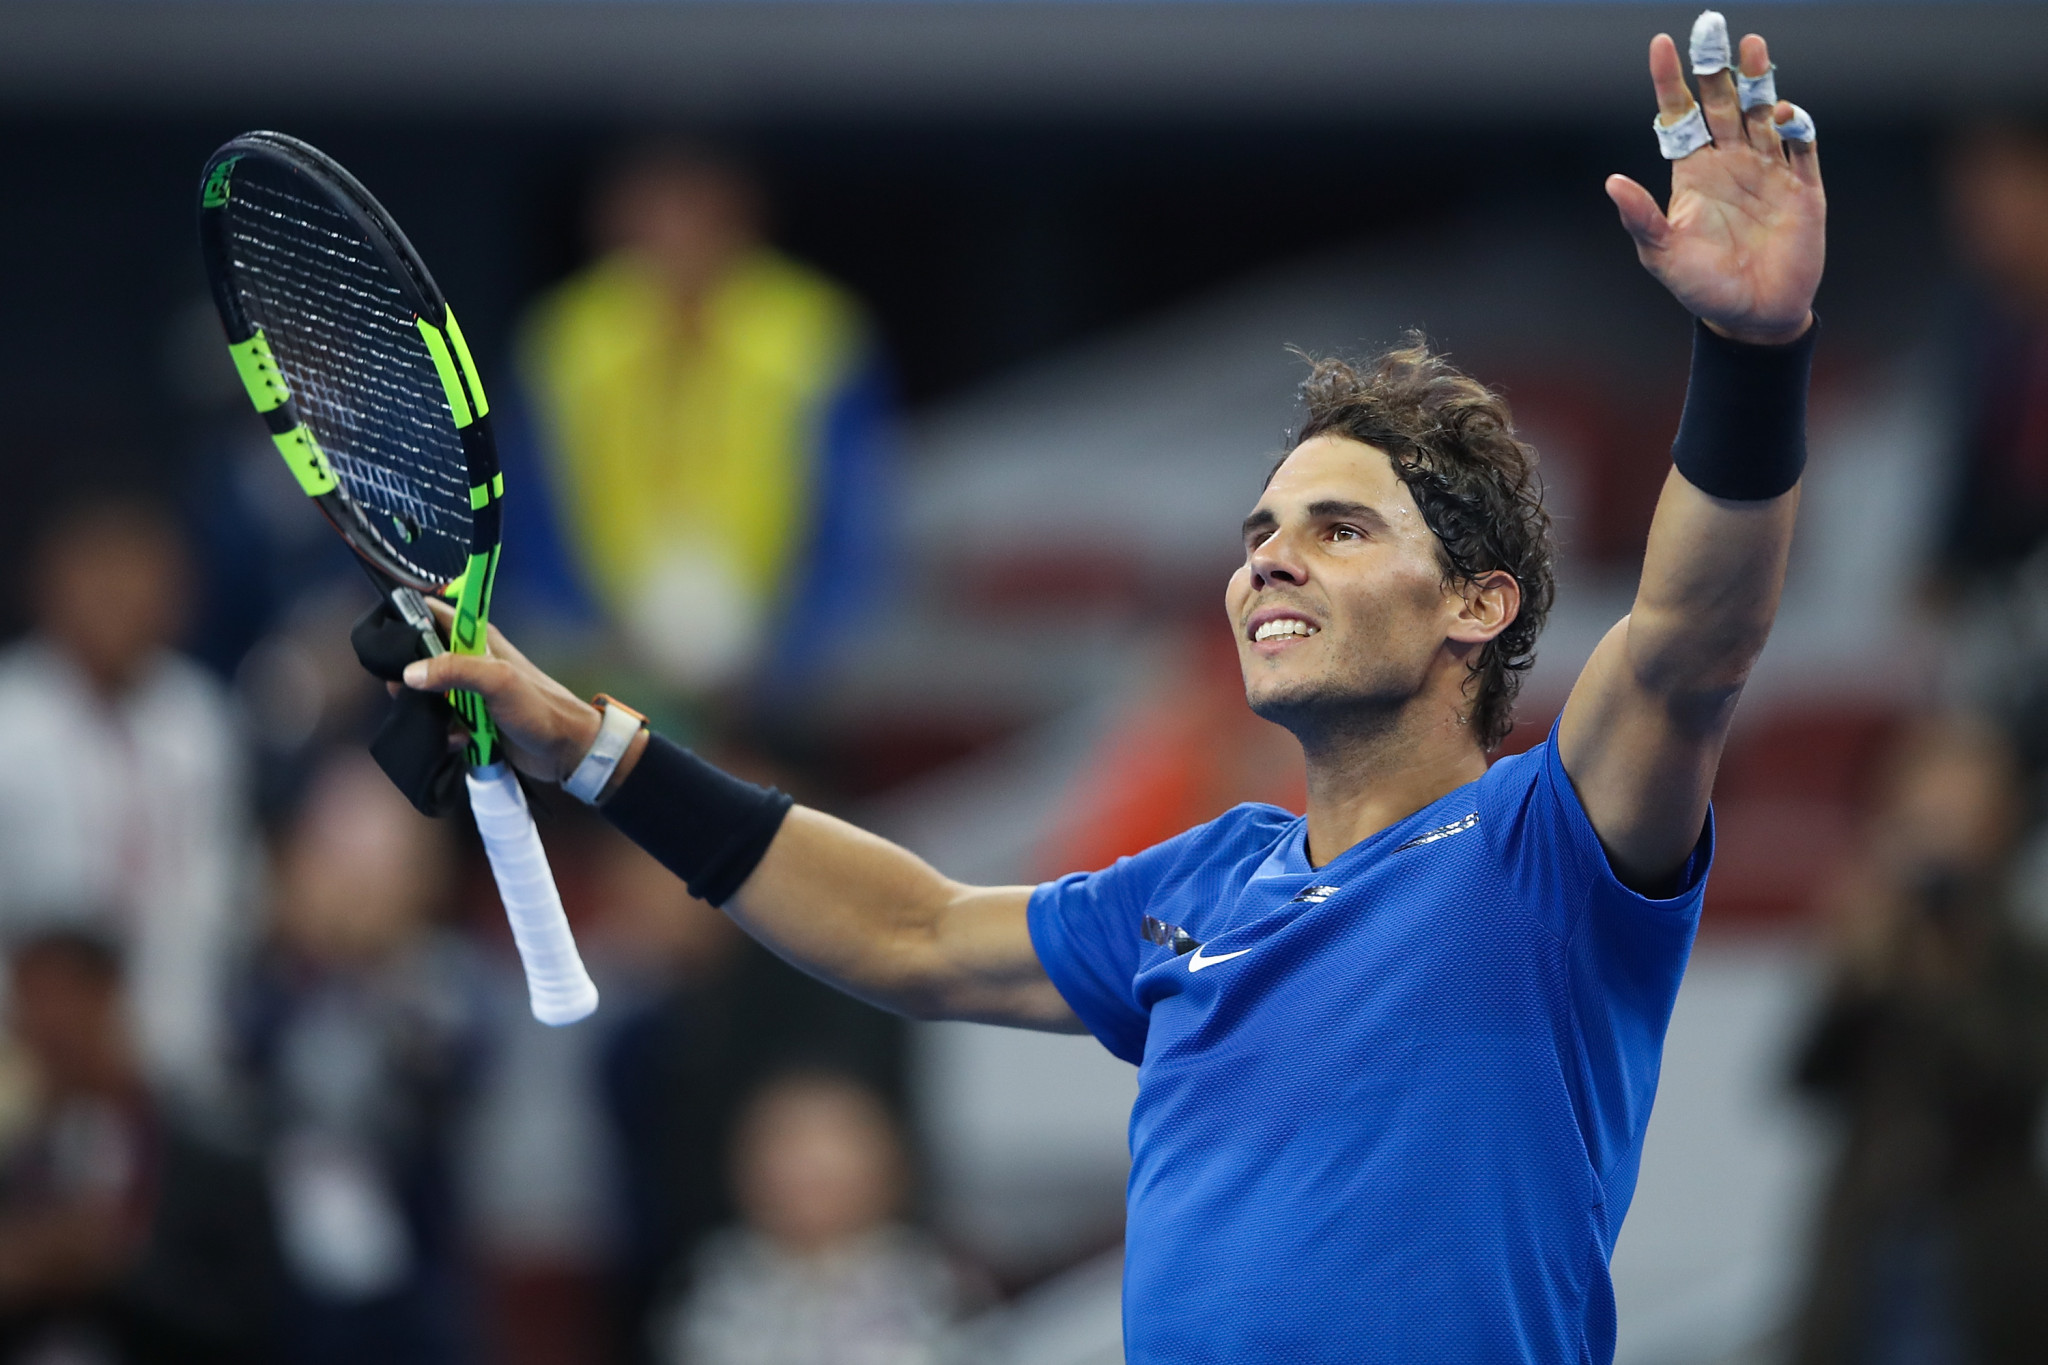 World number one Rafael Nadal saved two match points on his way to beating France’s Lucas Pouille in the first round of the China Open today ©Getty Images